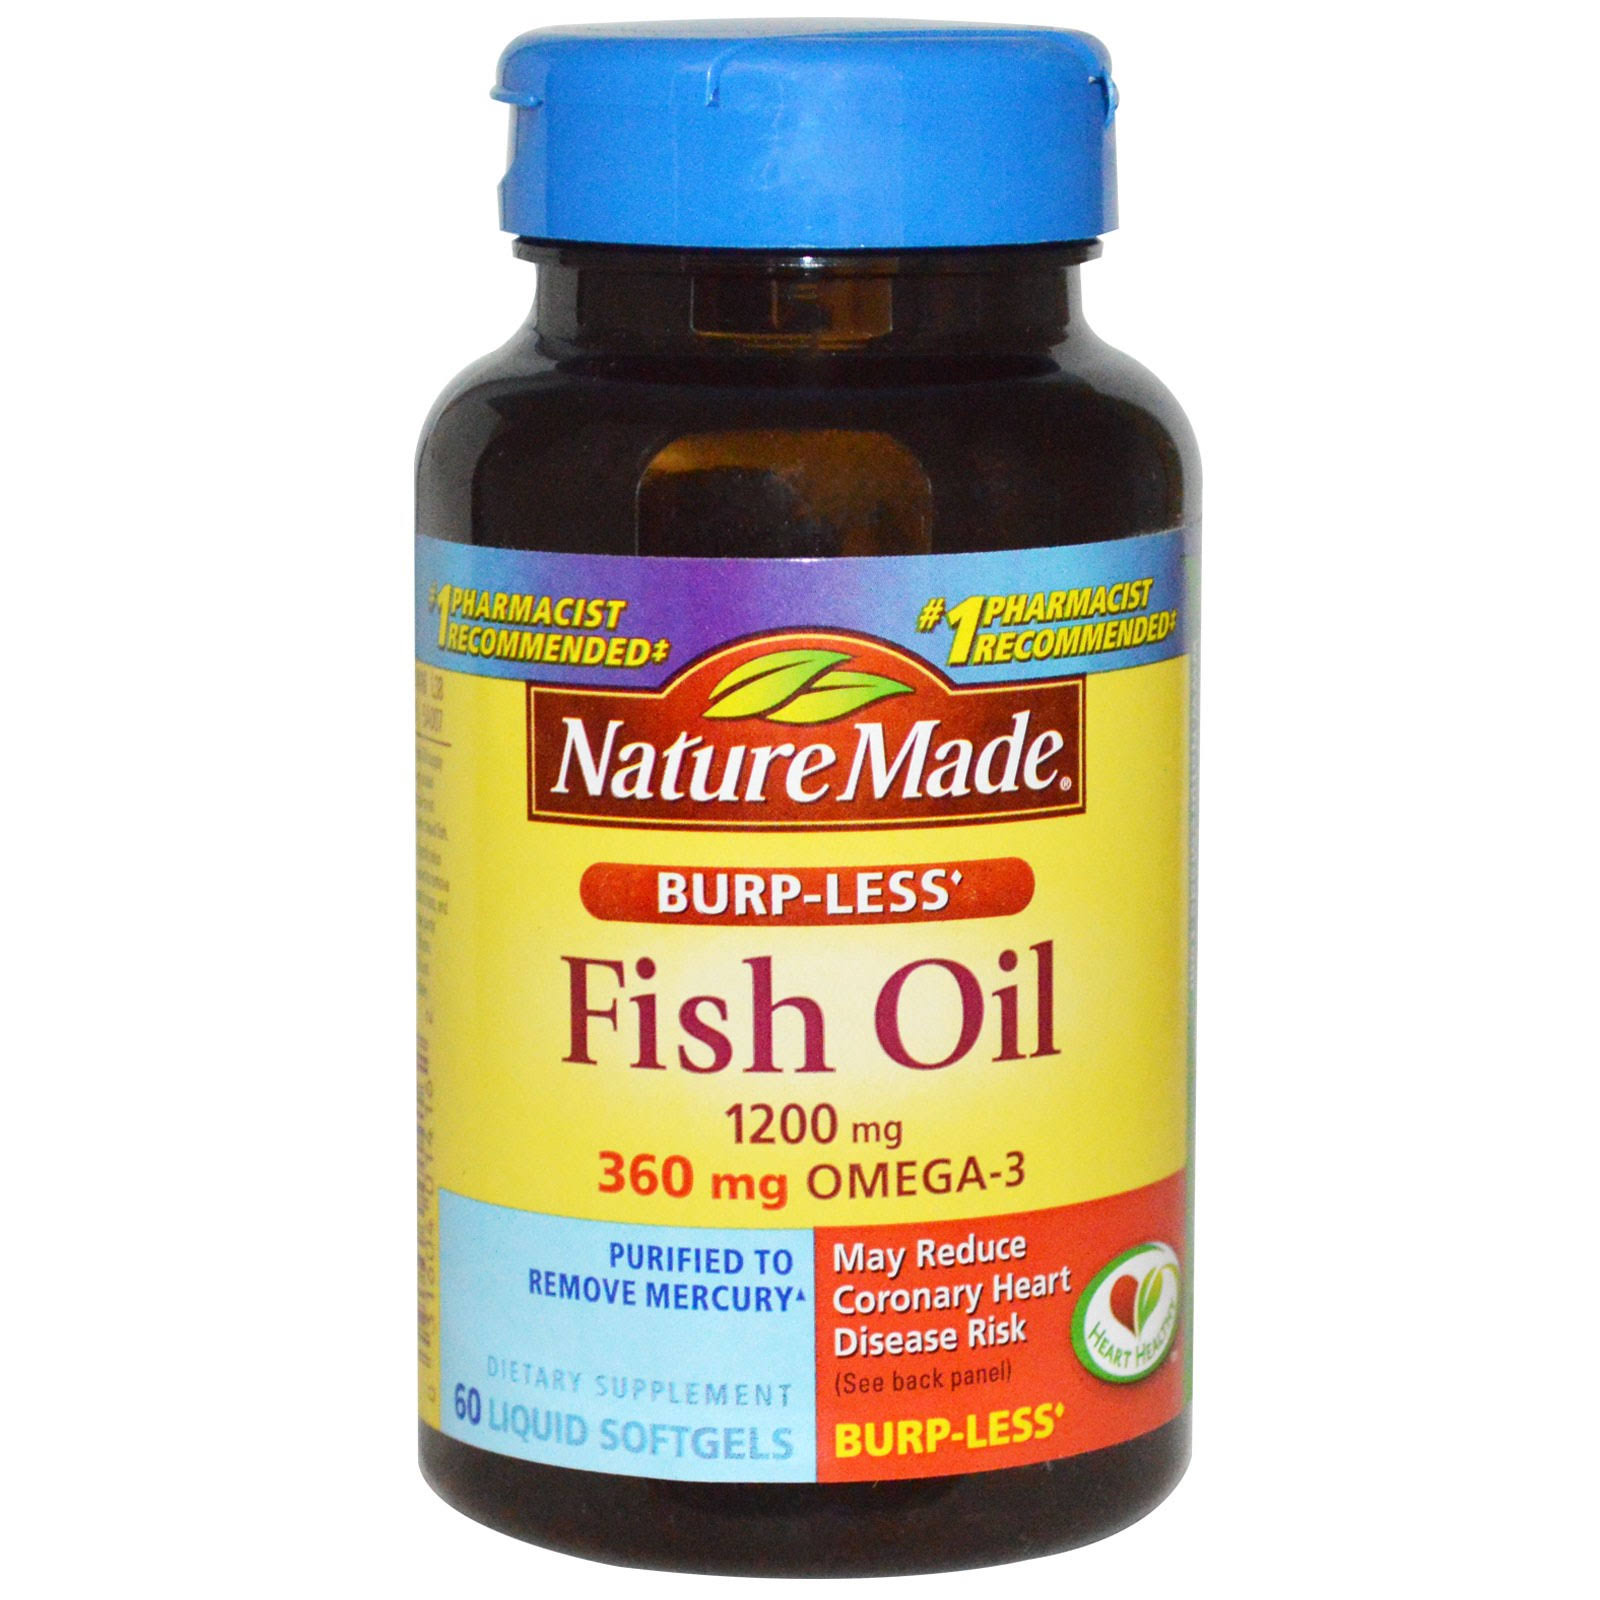 Nature Made Burpless Fish Oil 1200 mg with Omega-3